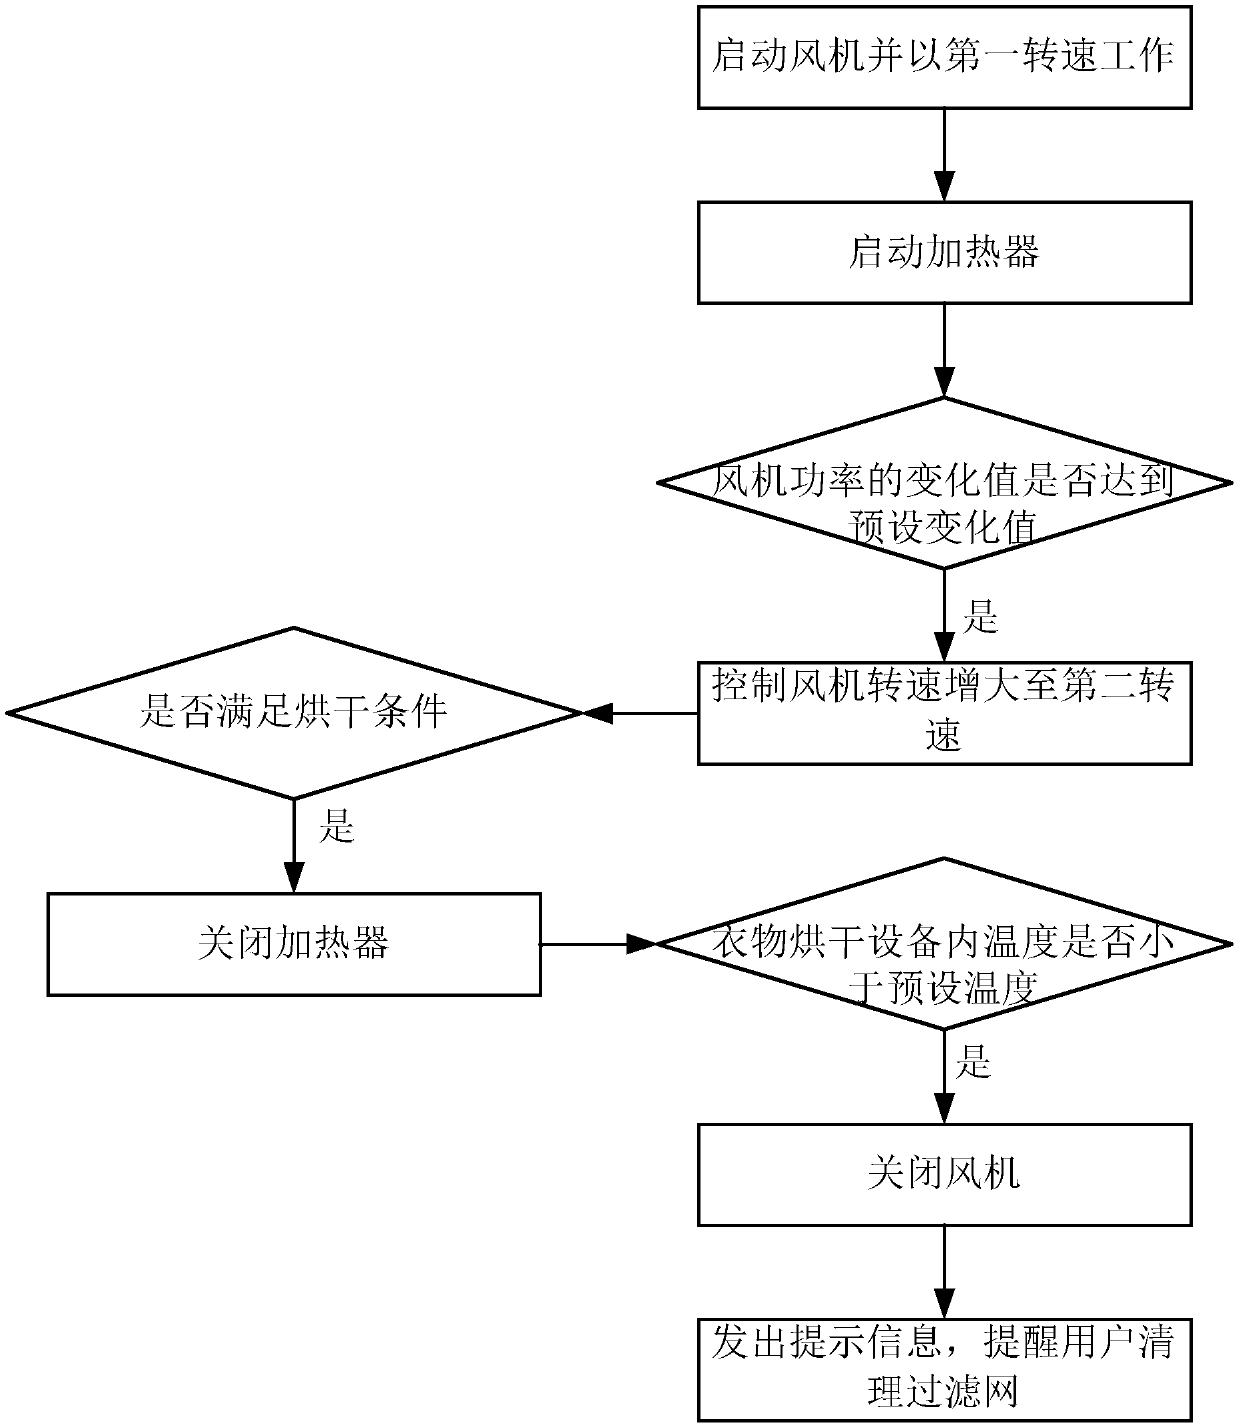 Control method of clothes drying equipment and clothes drying equipment